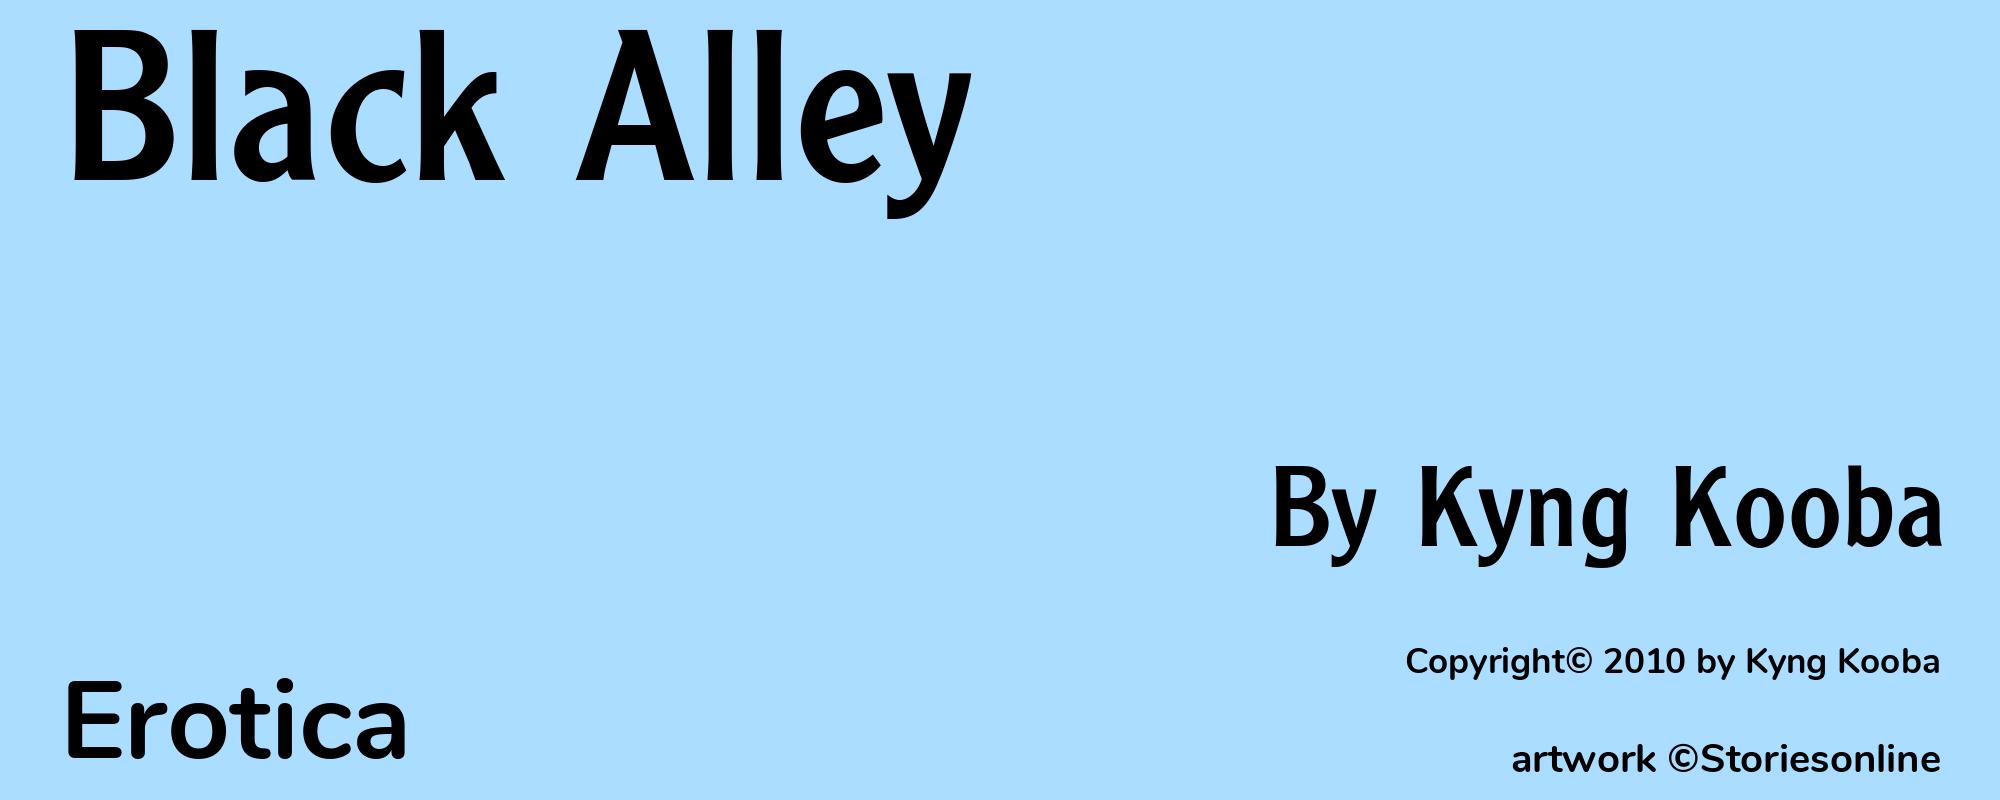 Black Alley - Cover